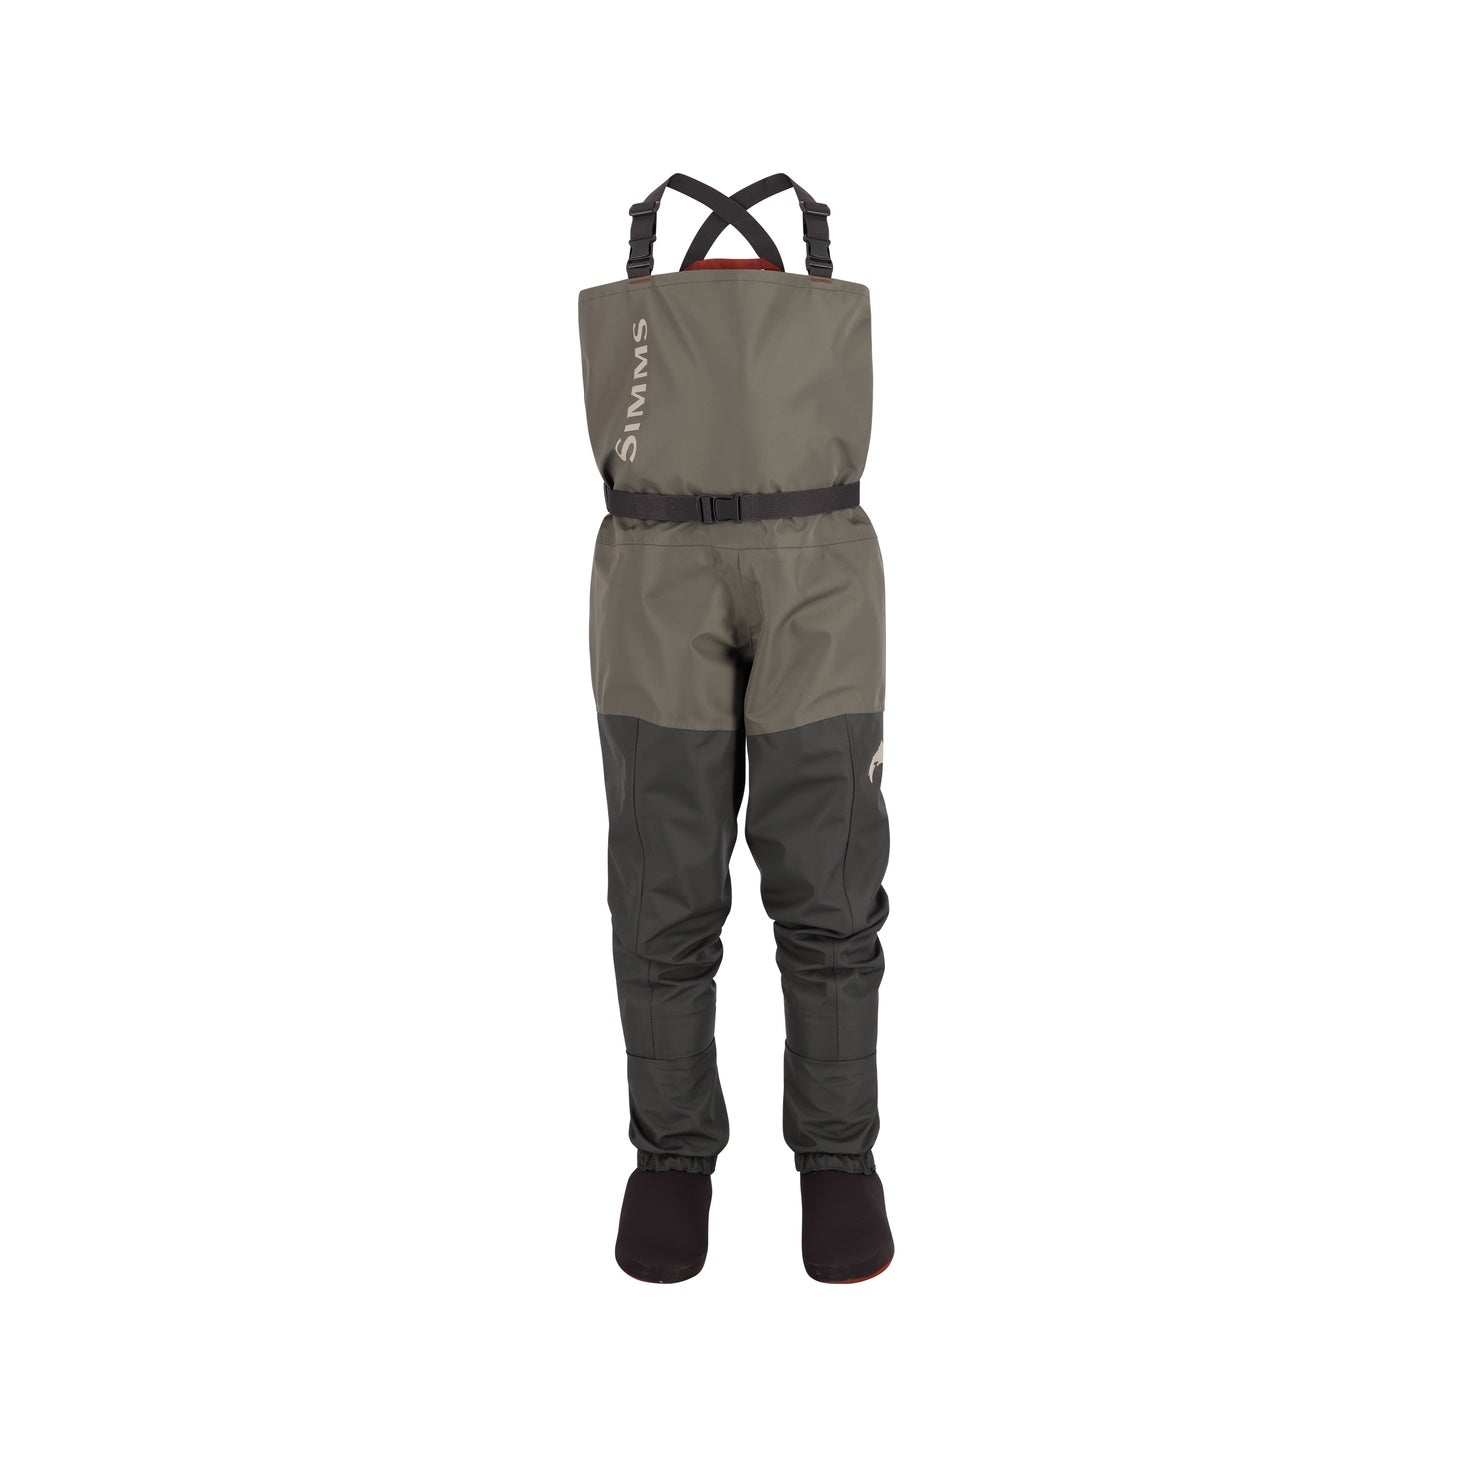 Simms K's Tributary (23) Wader